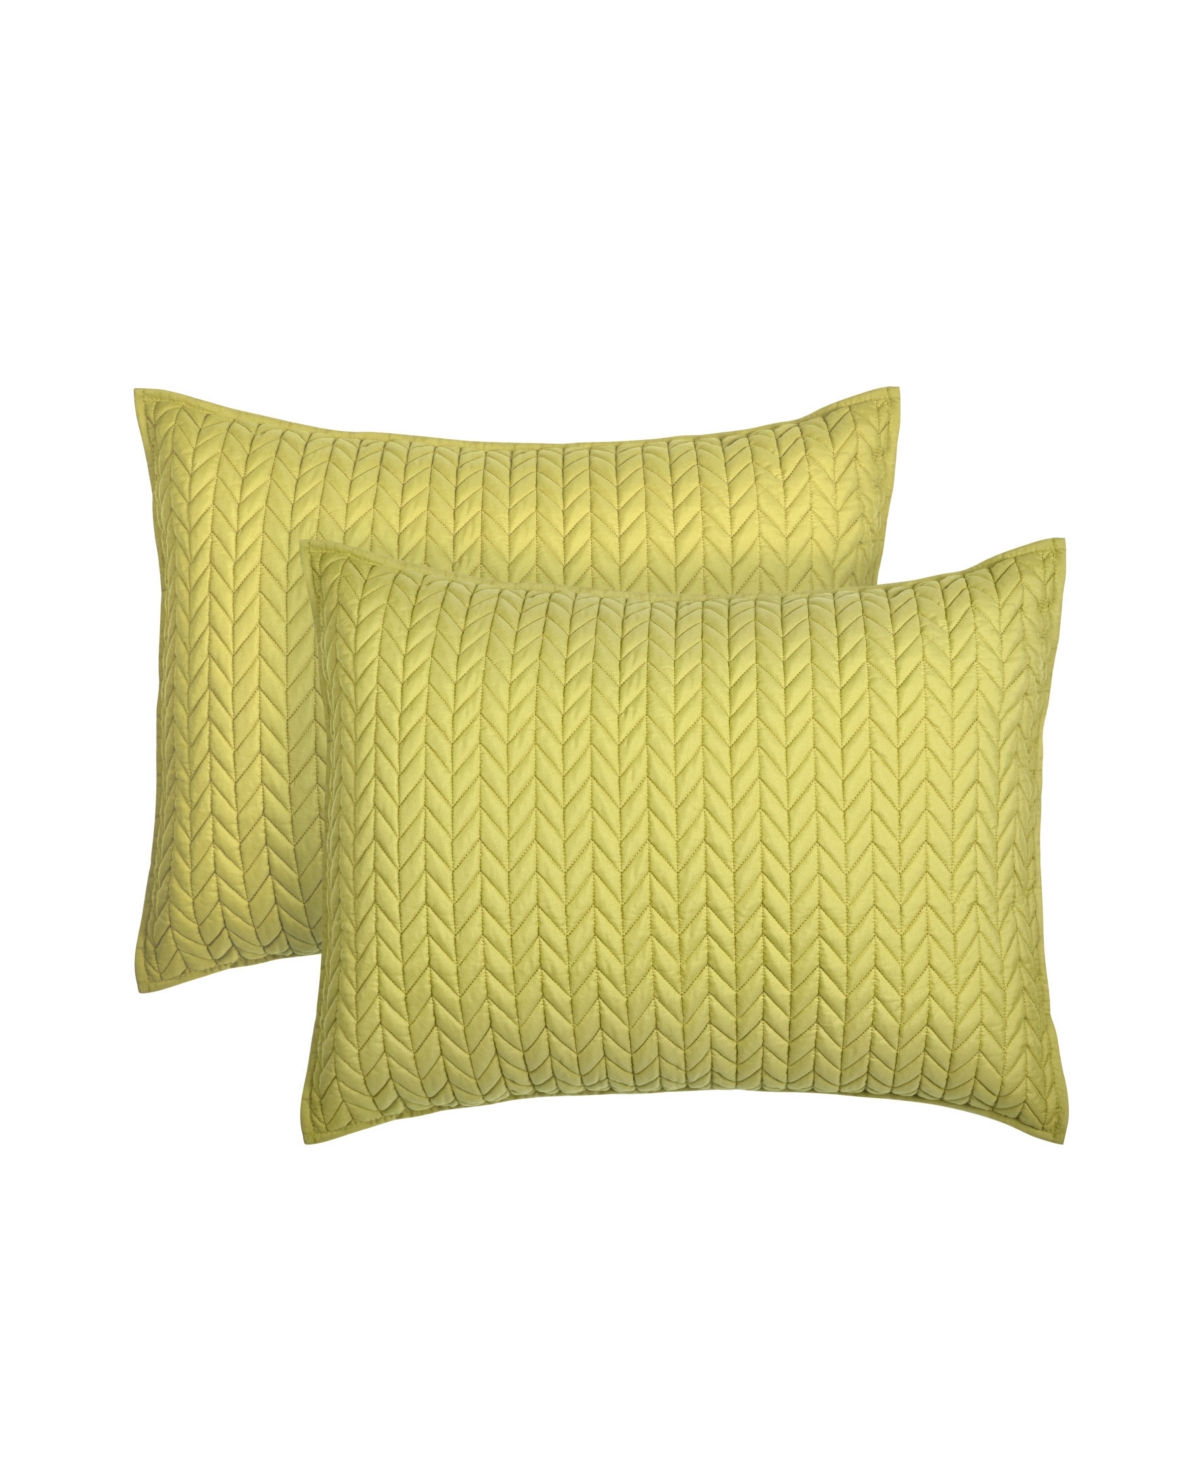 Cayman Quilted Sham, Standard - Chartreuse